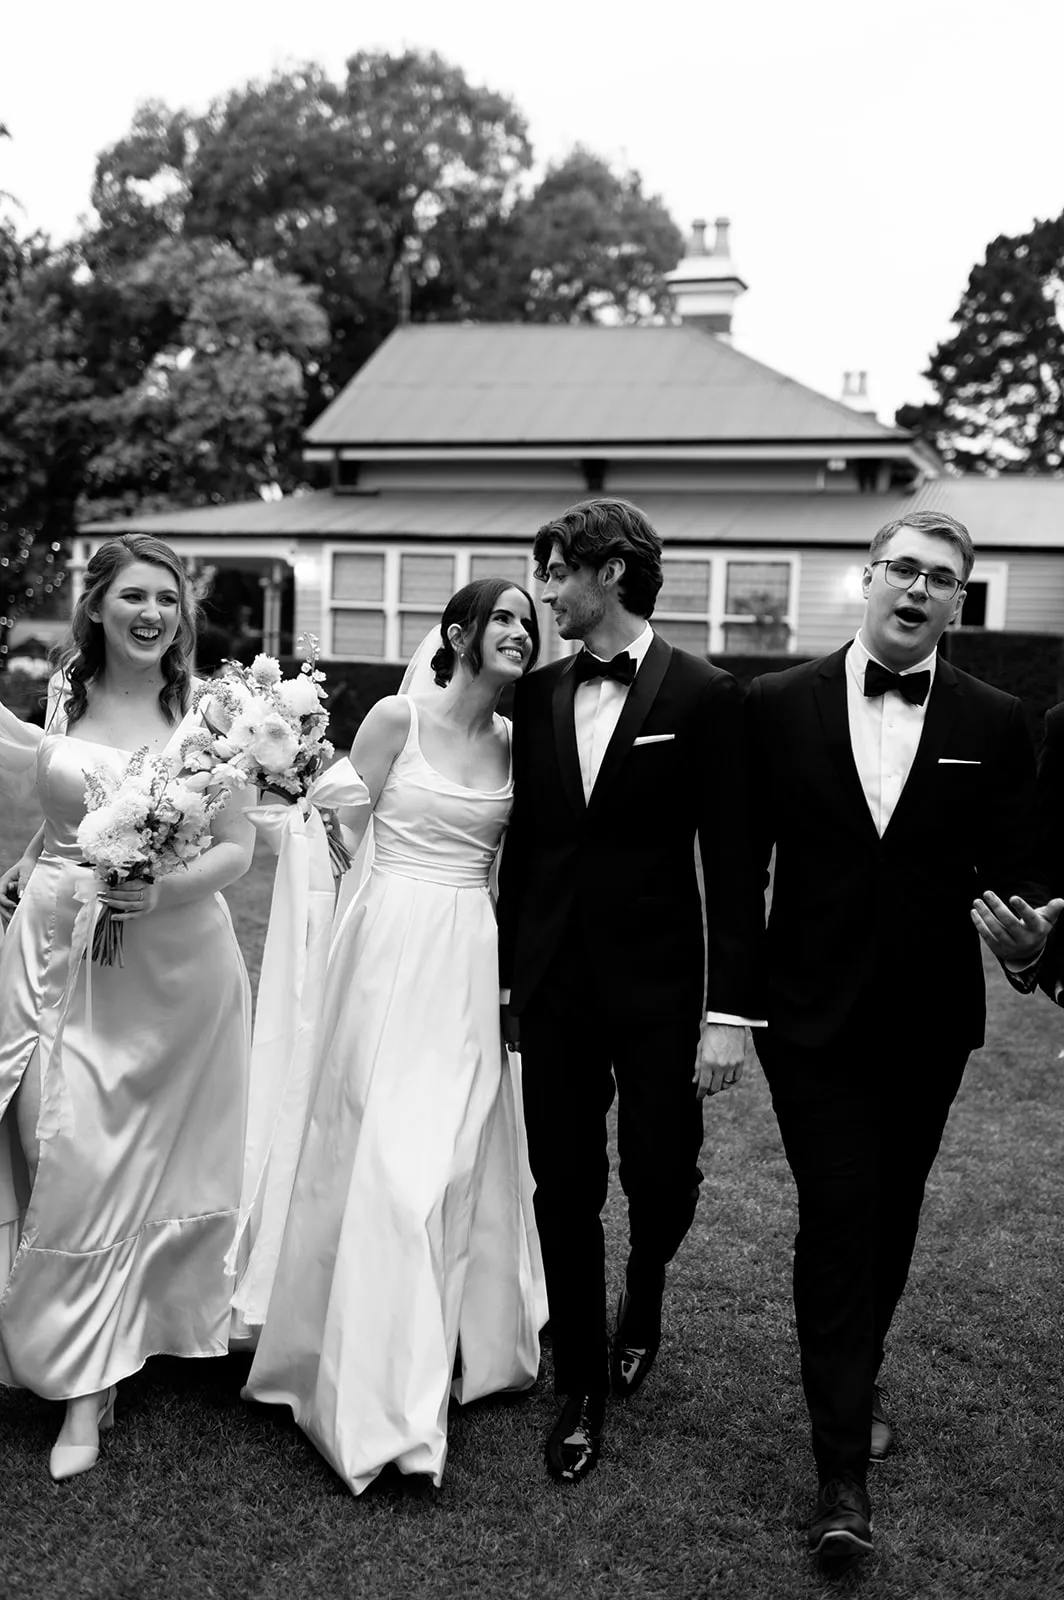 A black and white image shows four people walking together outdoors, dressed formally. The two women in white dresses carry bouquets, and the two men in black tuxedos are smiling and conversing. There's a building with a peaked roof in the background.